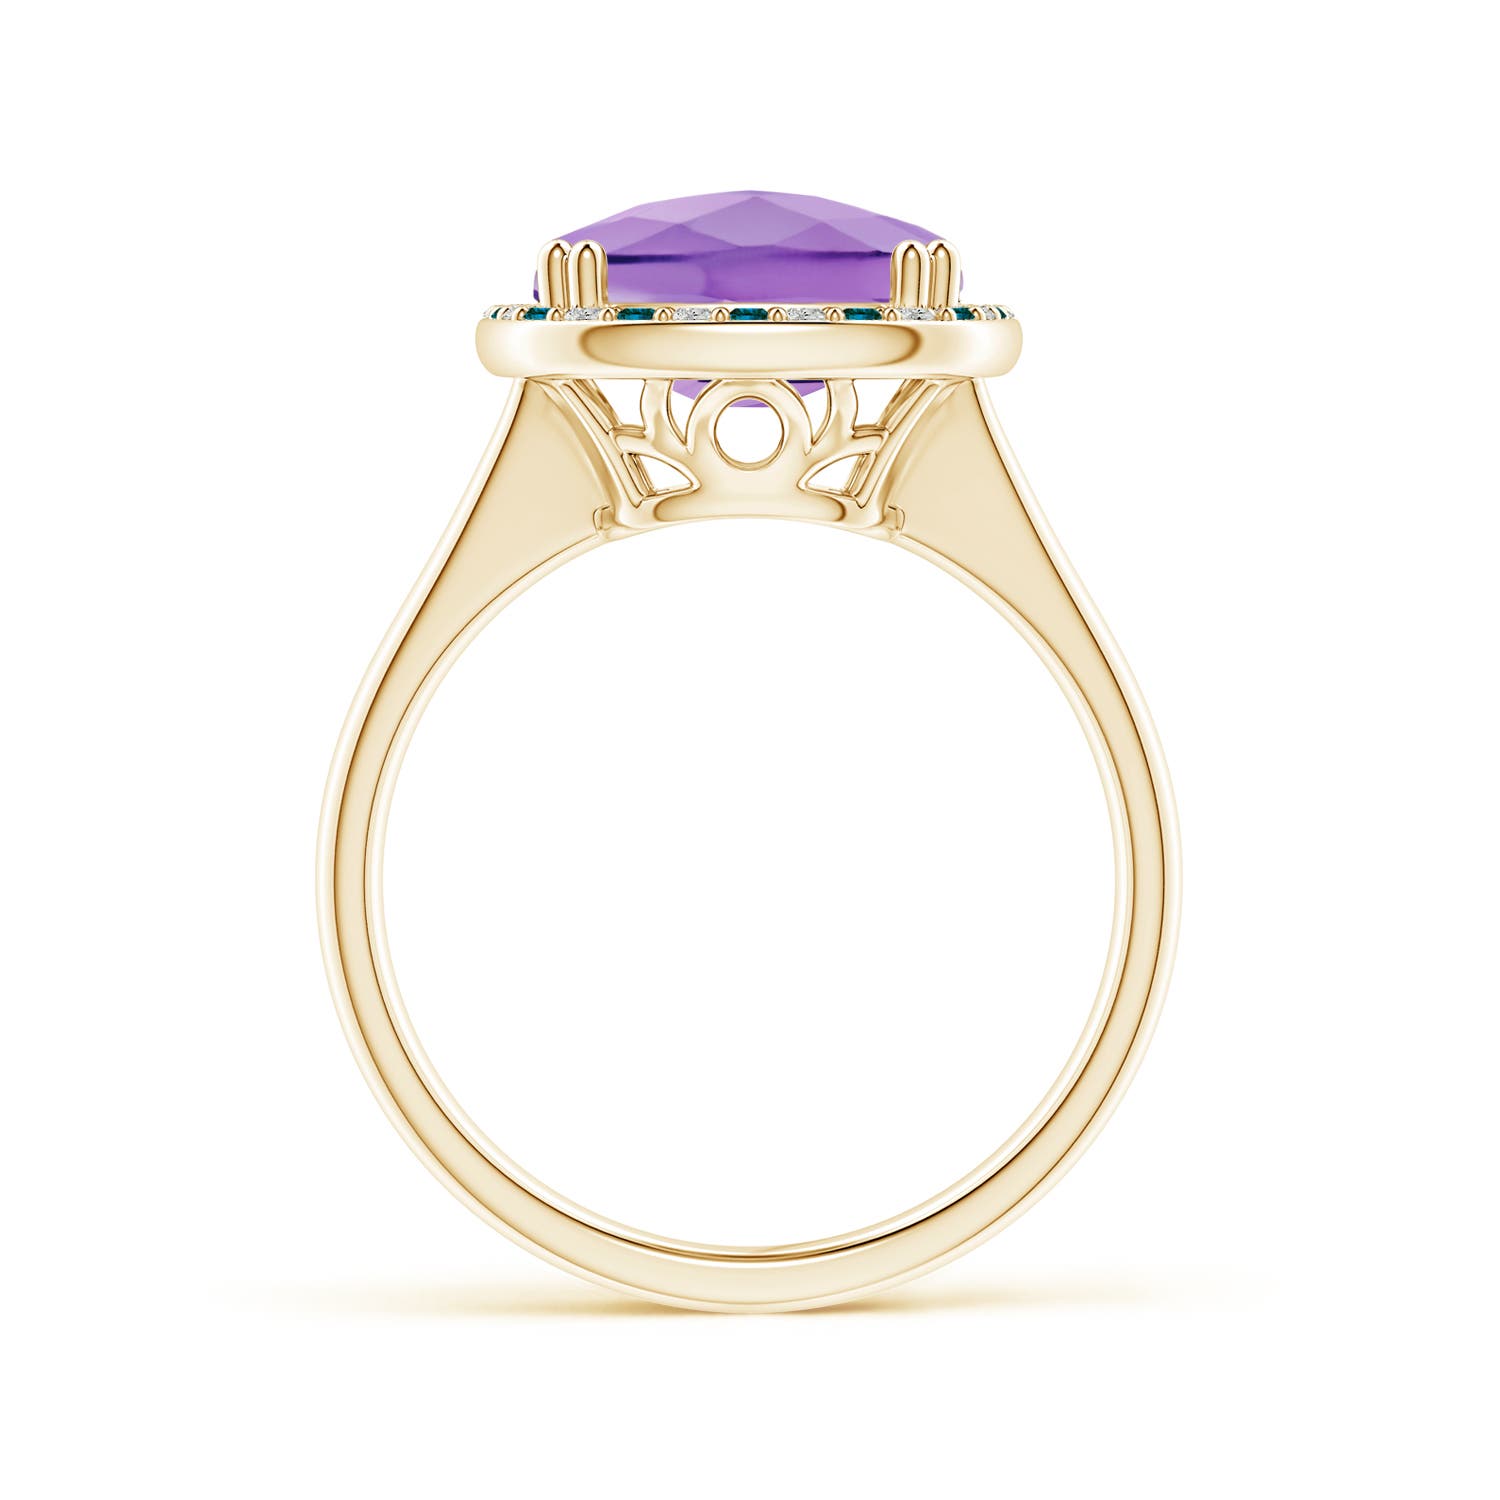 A - Amethyst / 4.59 CT / 14 KT Yellow Gold